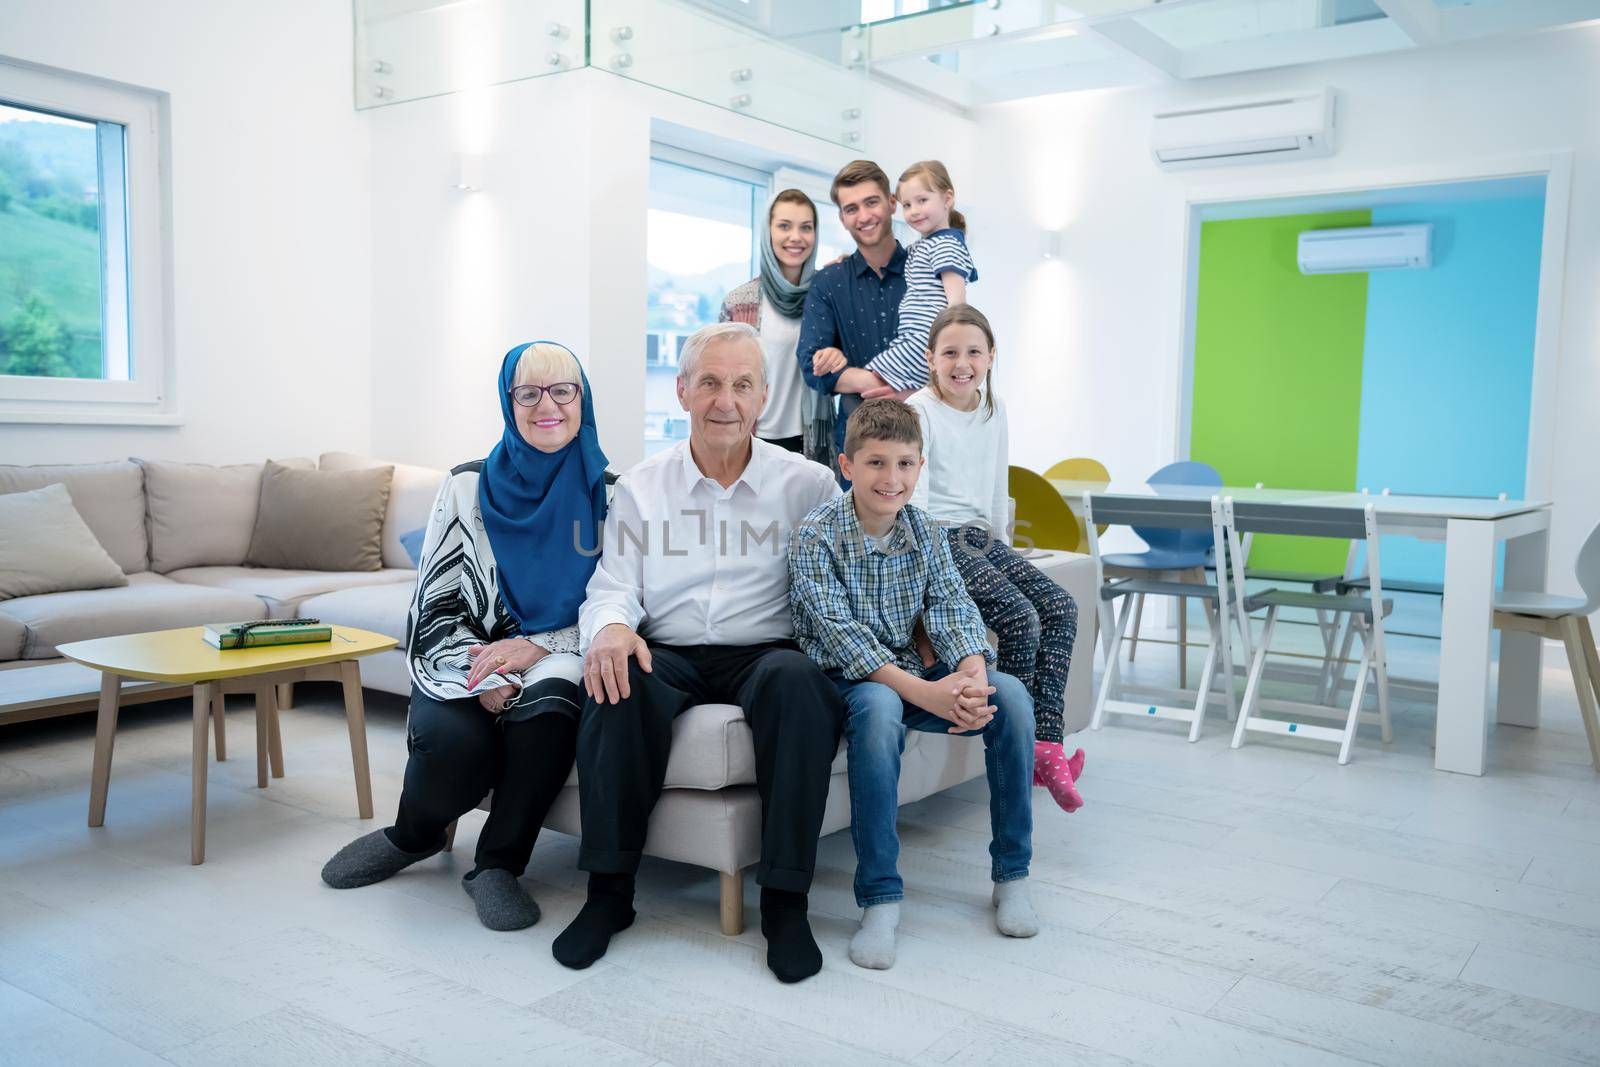 several generations portrait of happy modern muslim family before iftar dinner during ramadan feast at home